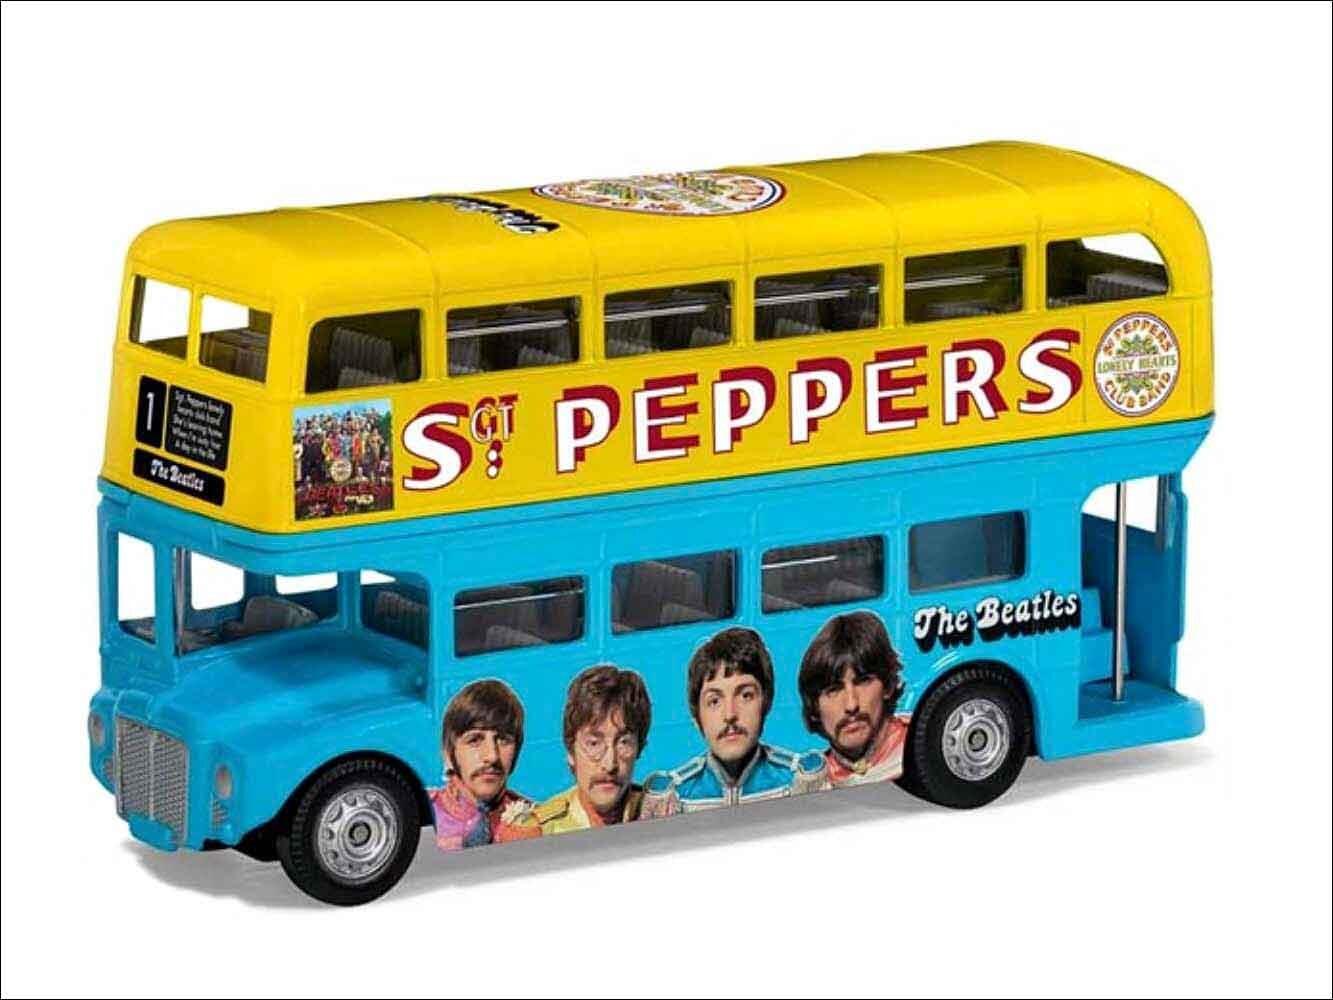 Beatles London Bus 'Sgt. Pepper's Lonely Hearts Club Band'